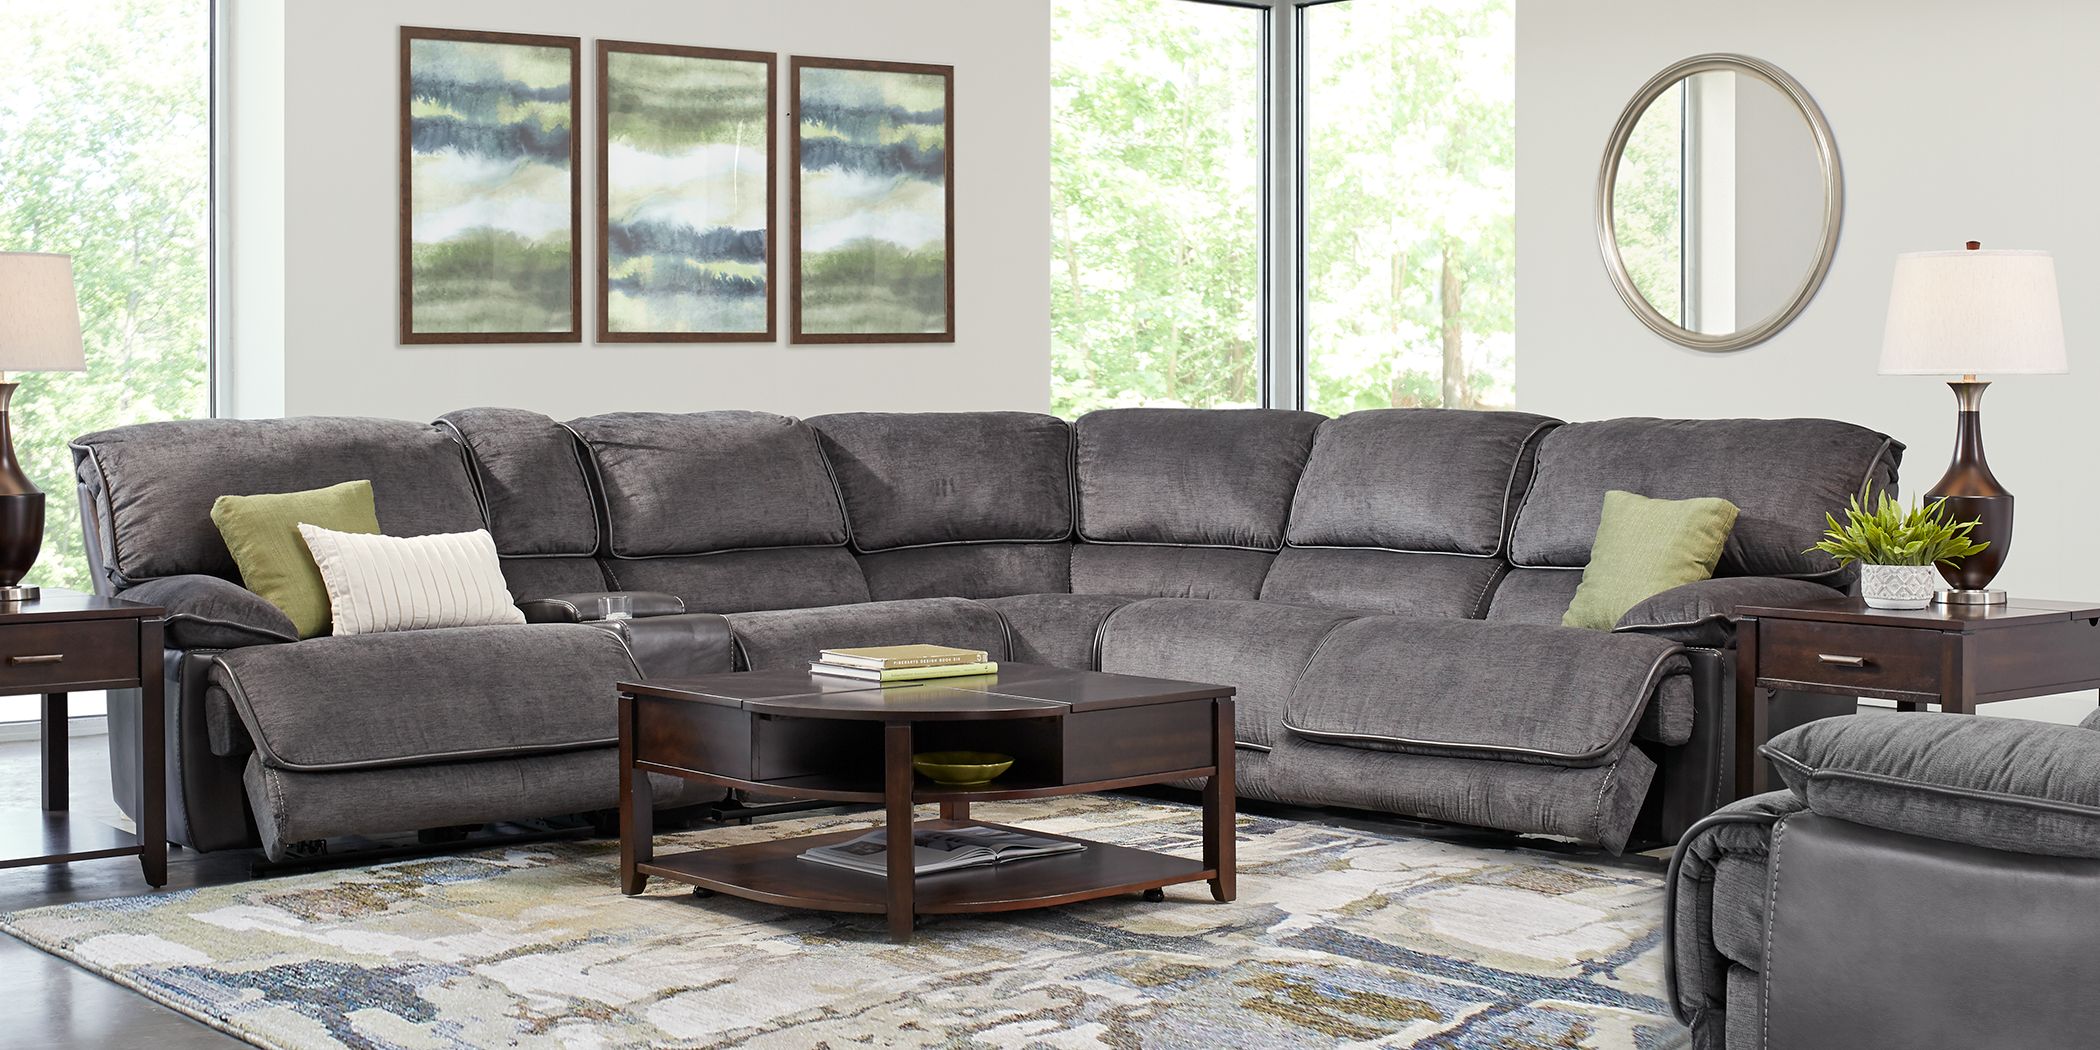 Riverbrook Gray 6 Pc Power Reclining Sectional 1578707P Image Room?cache Id=d869c719f371583ad883c0f2f5457900